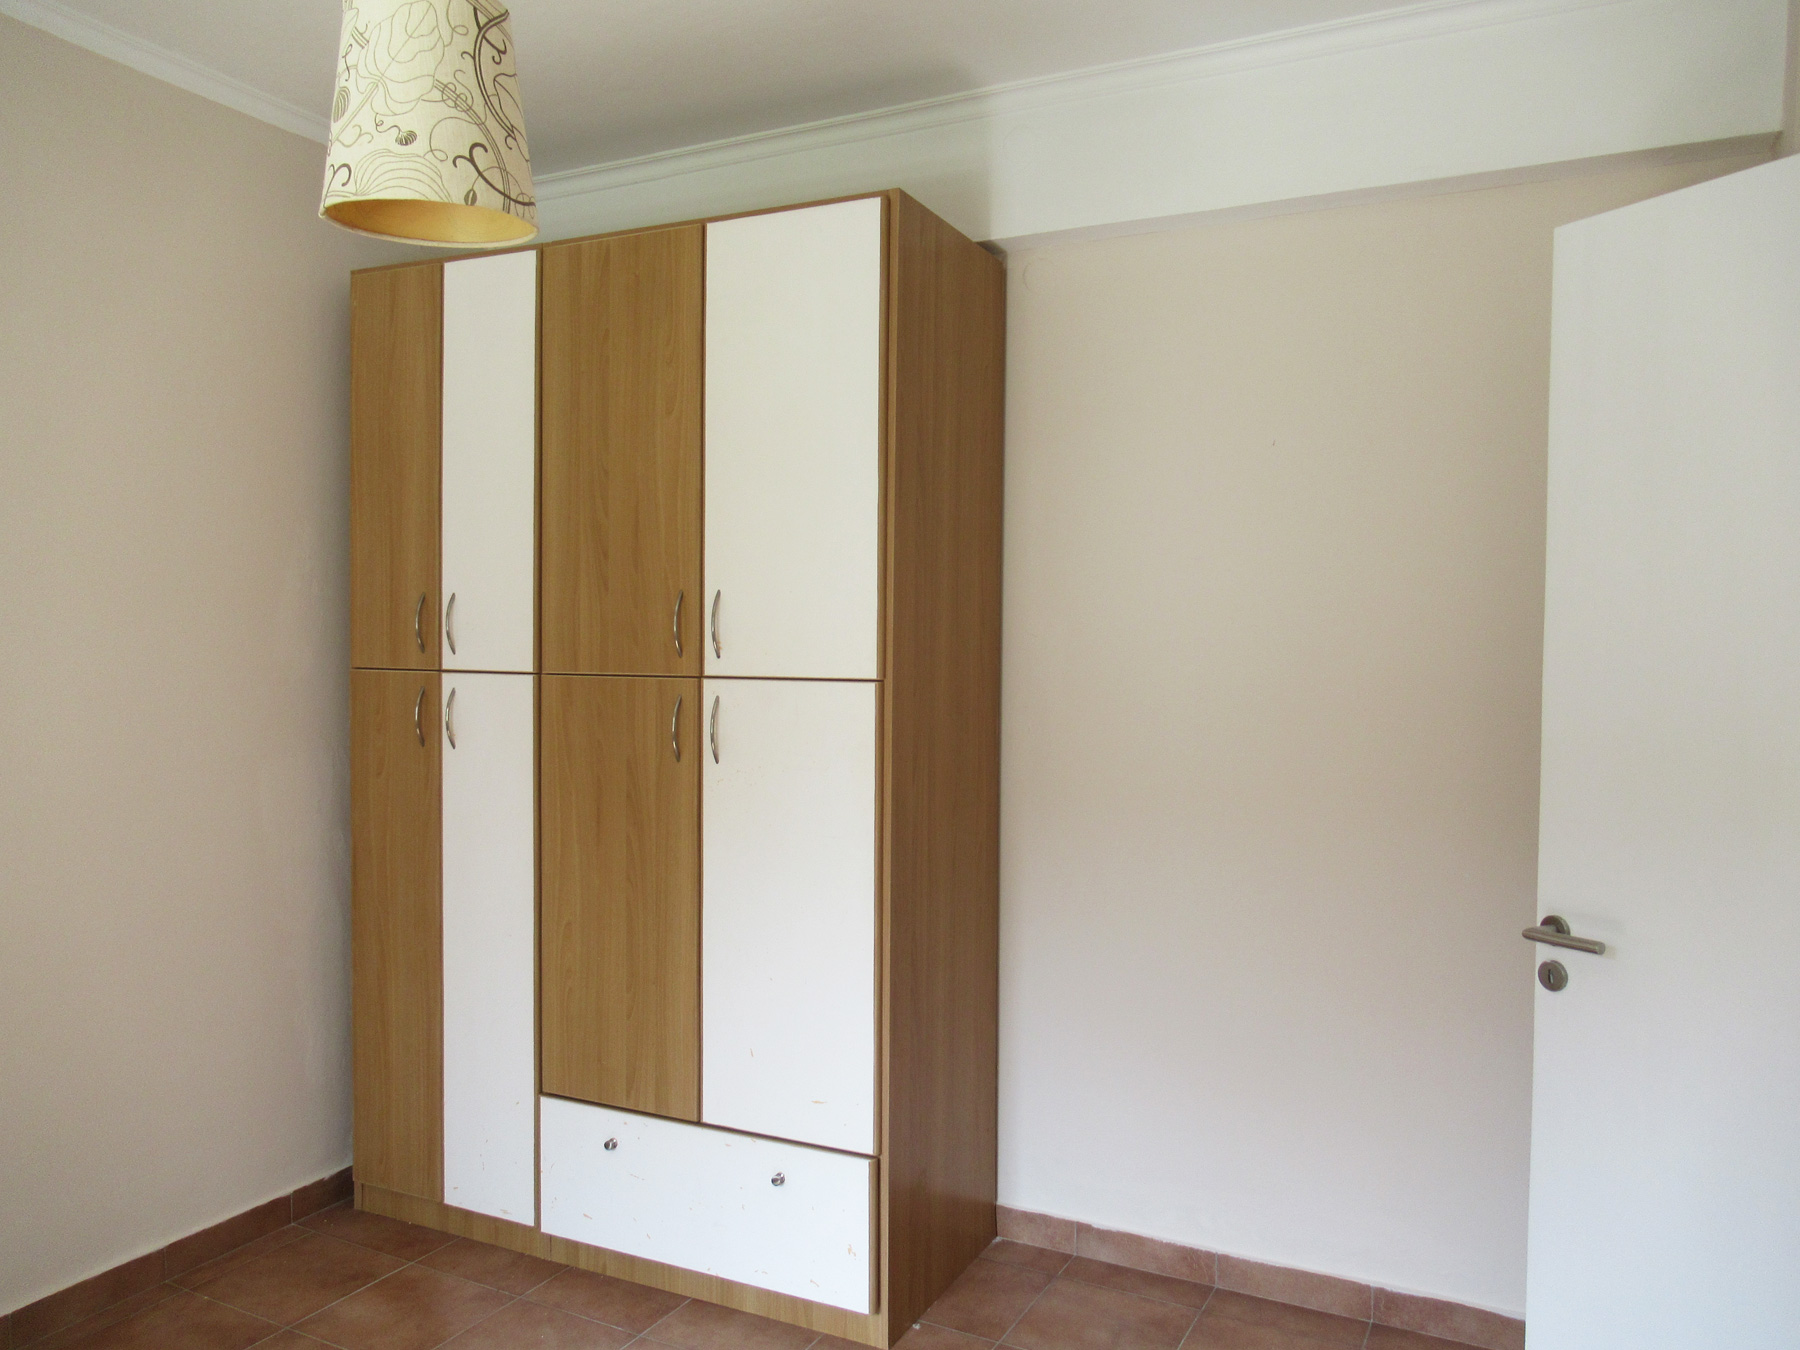 For rent sunny one bedroom studio of 40 sq.m. on the 1st floor in the center of Ioannina.